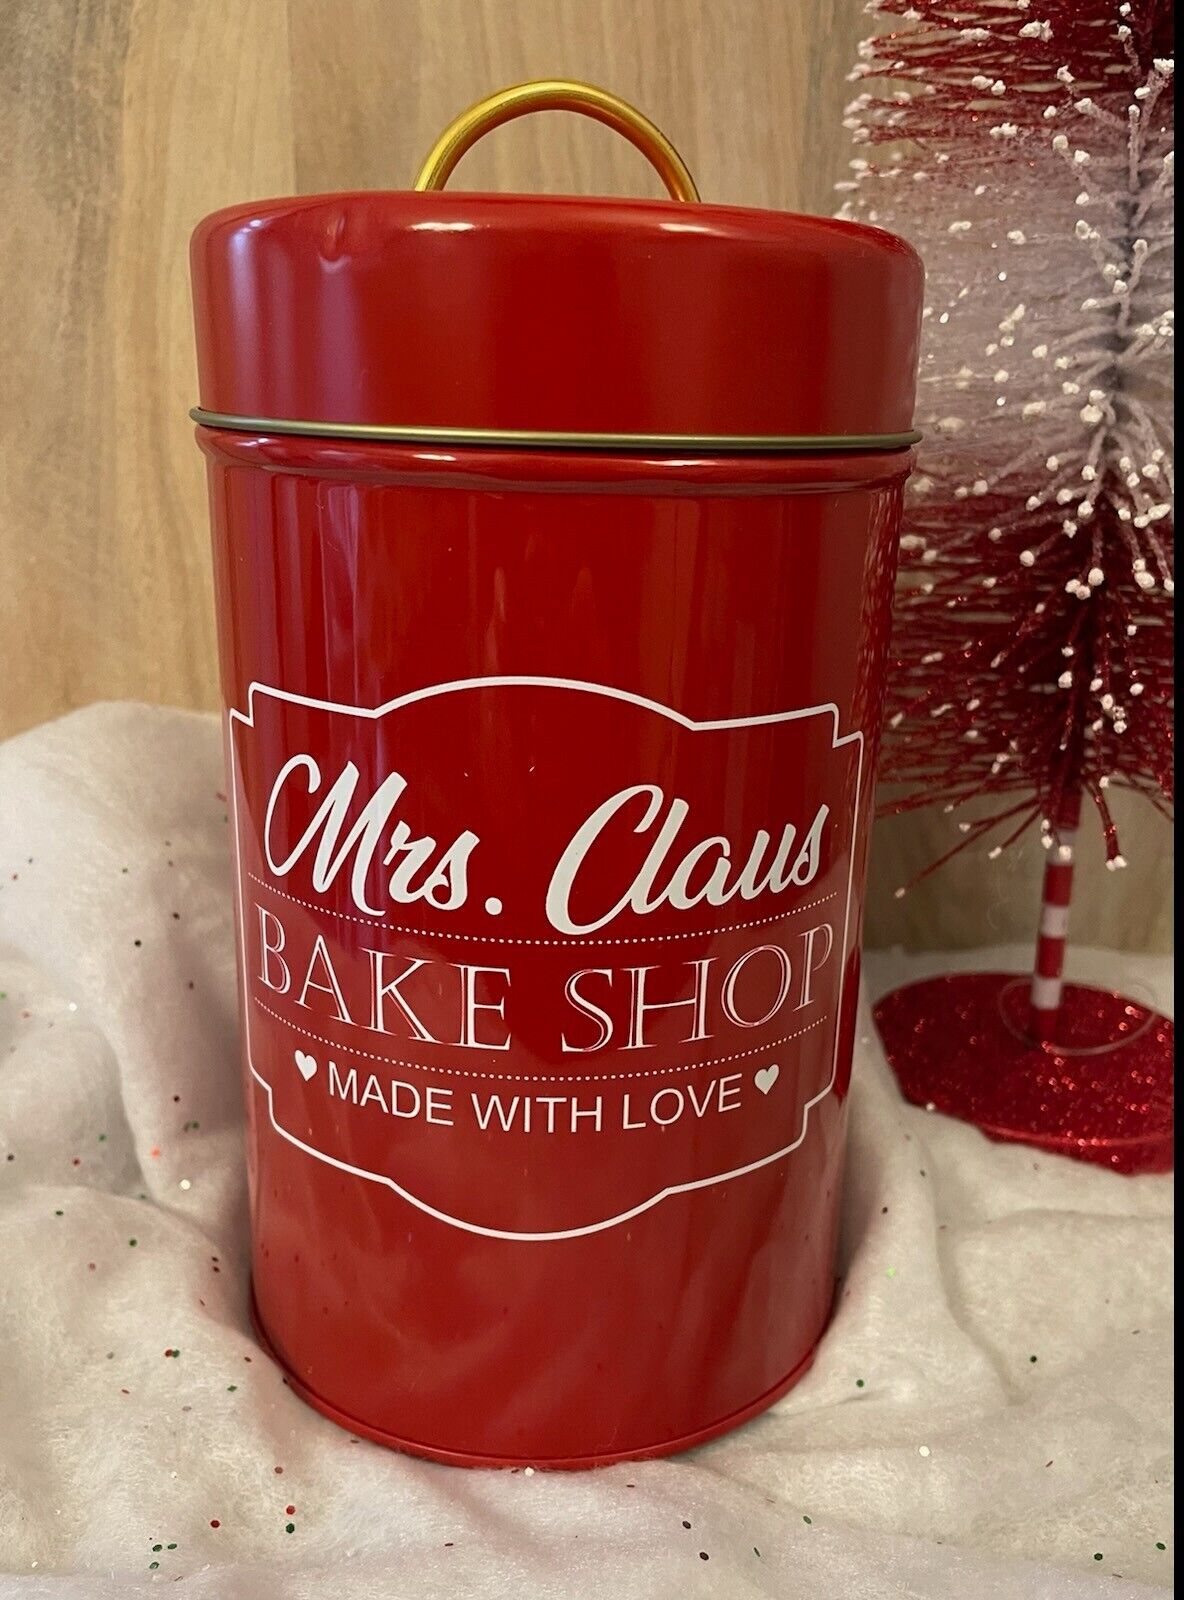 New Retro Vintage Red Mrs. Claus Bake Shop Cookies Tin Canister Container